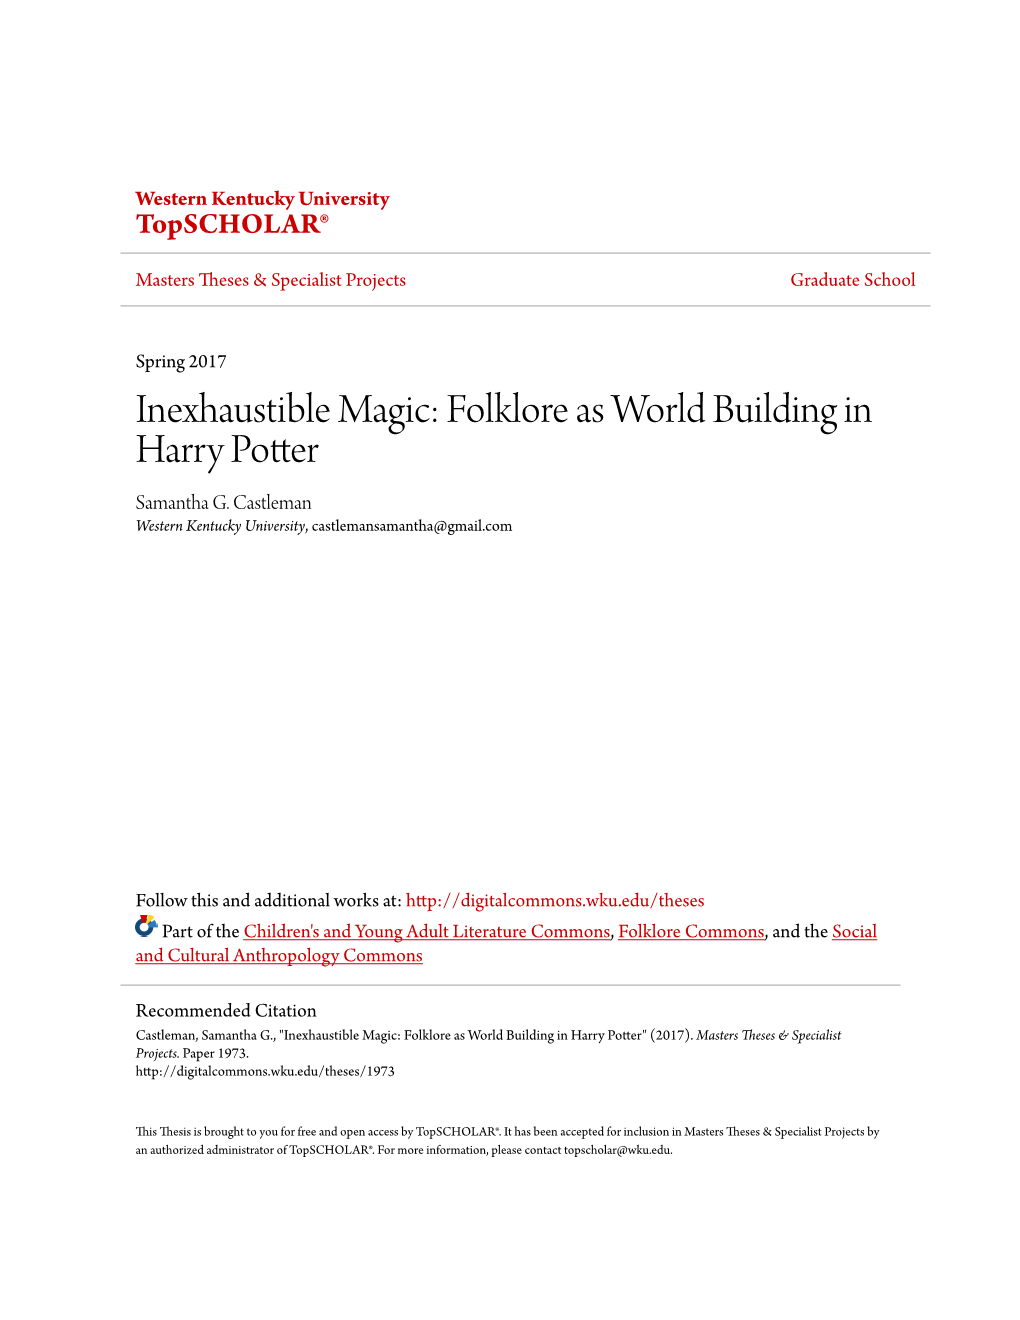 Folklore As World Building in Harry Potter Samantha G